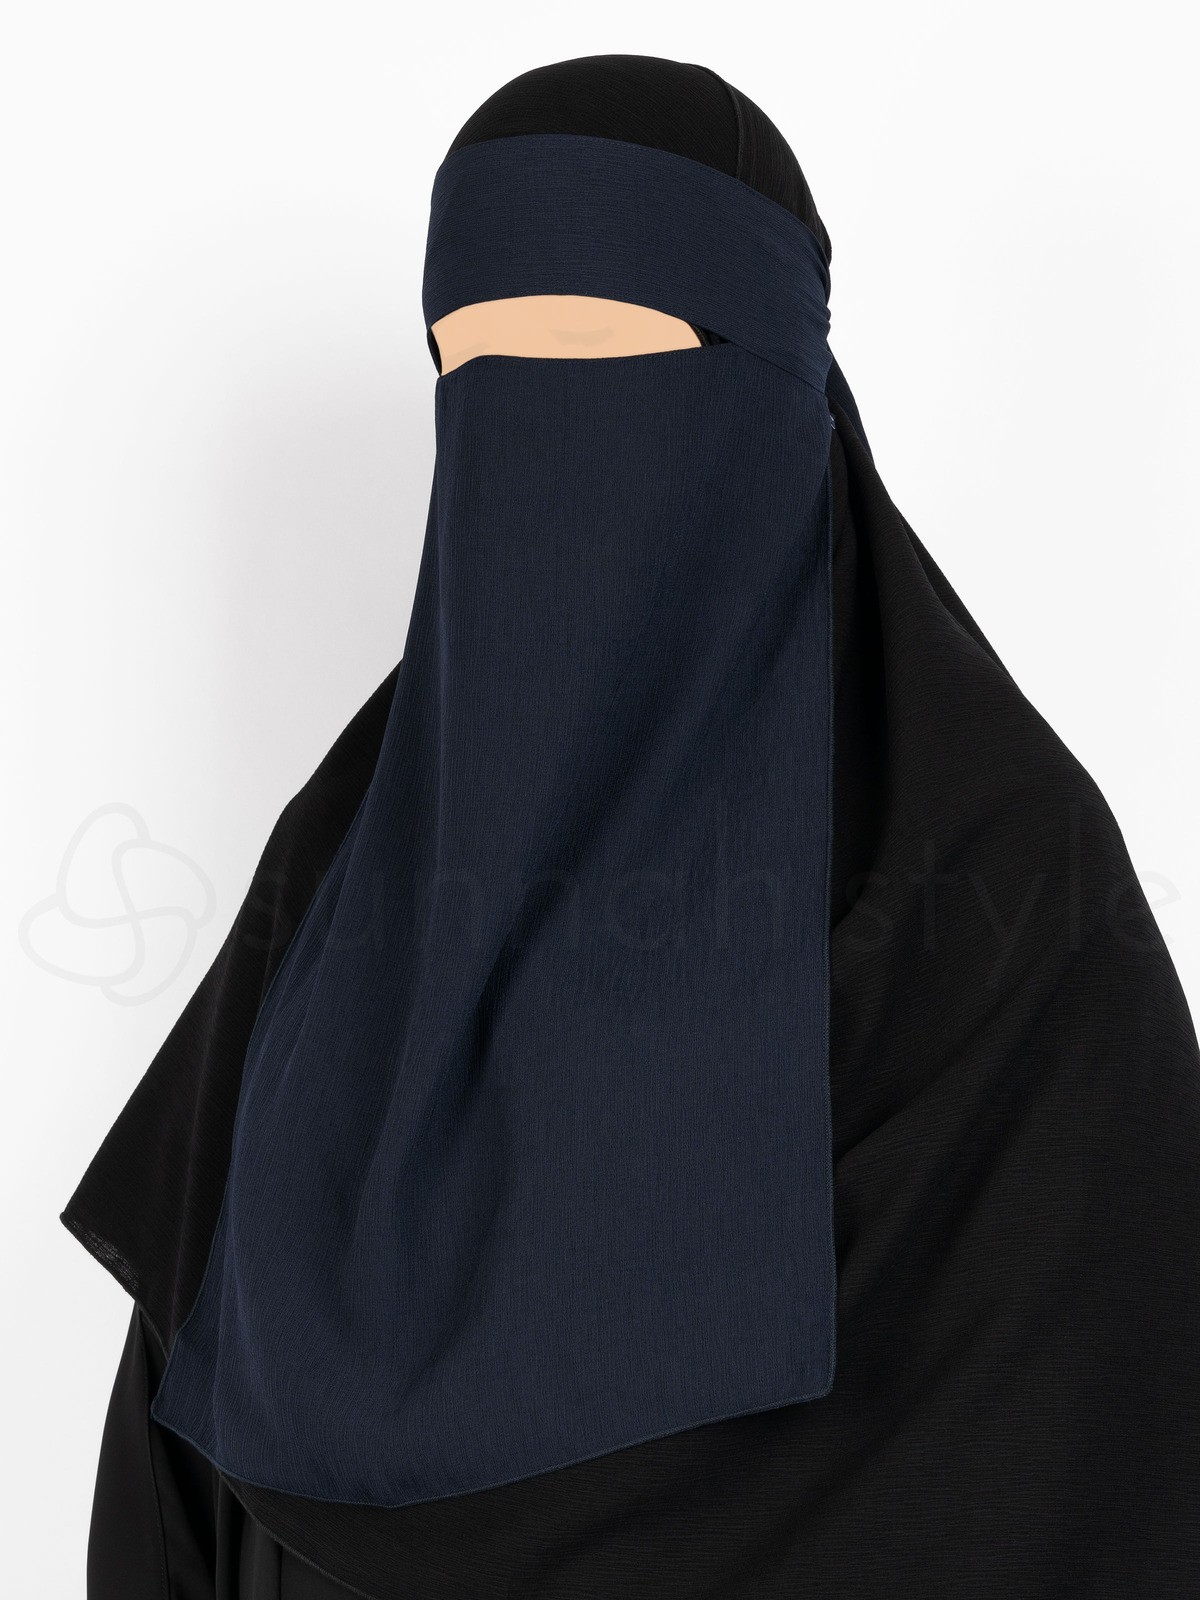 Sunnah Style - Brushed One Layer Niqab (Navy Blue)